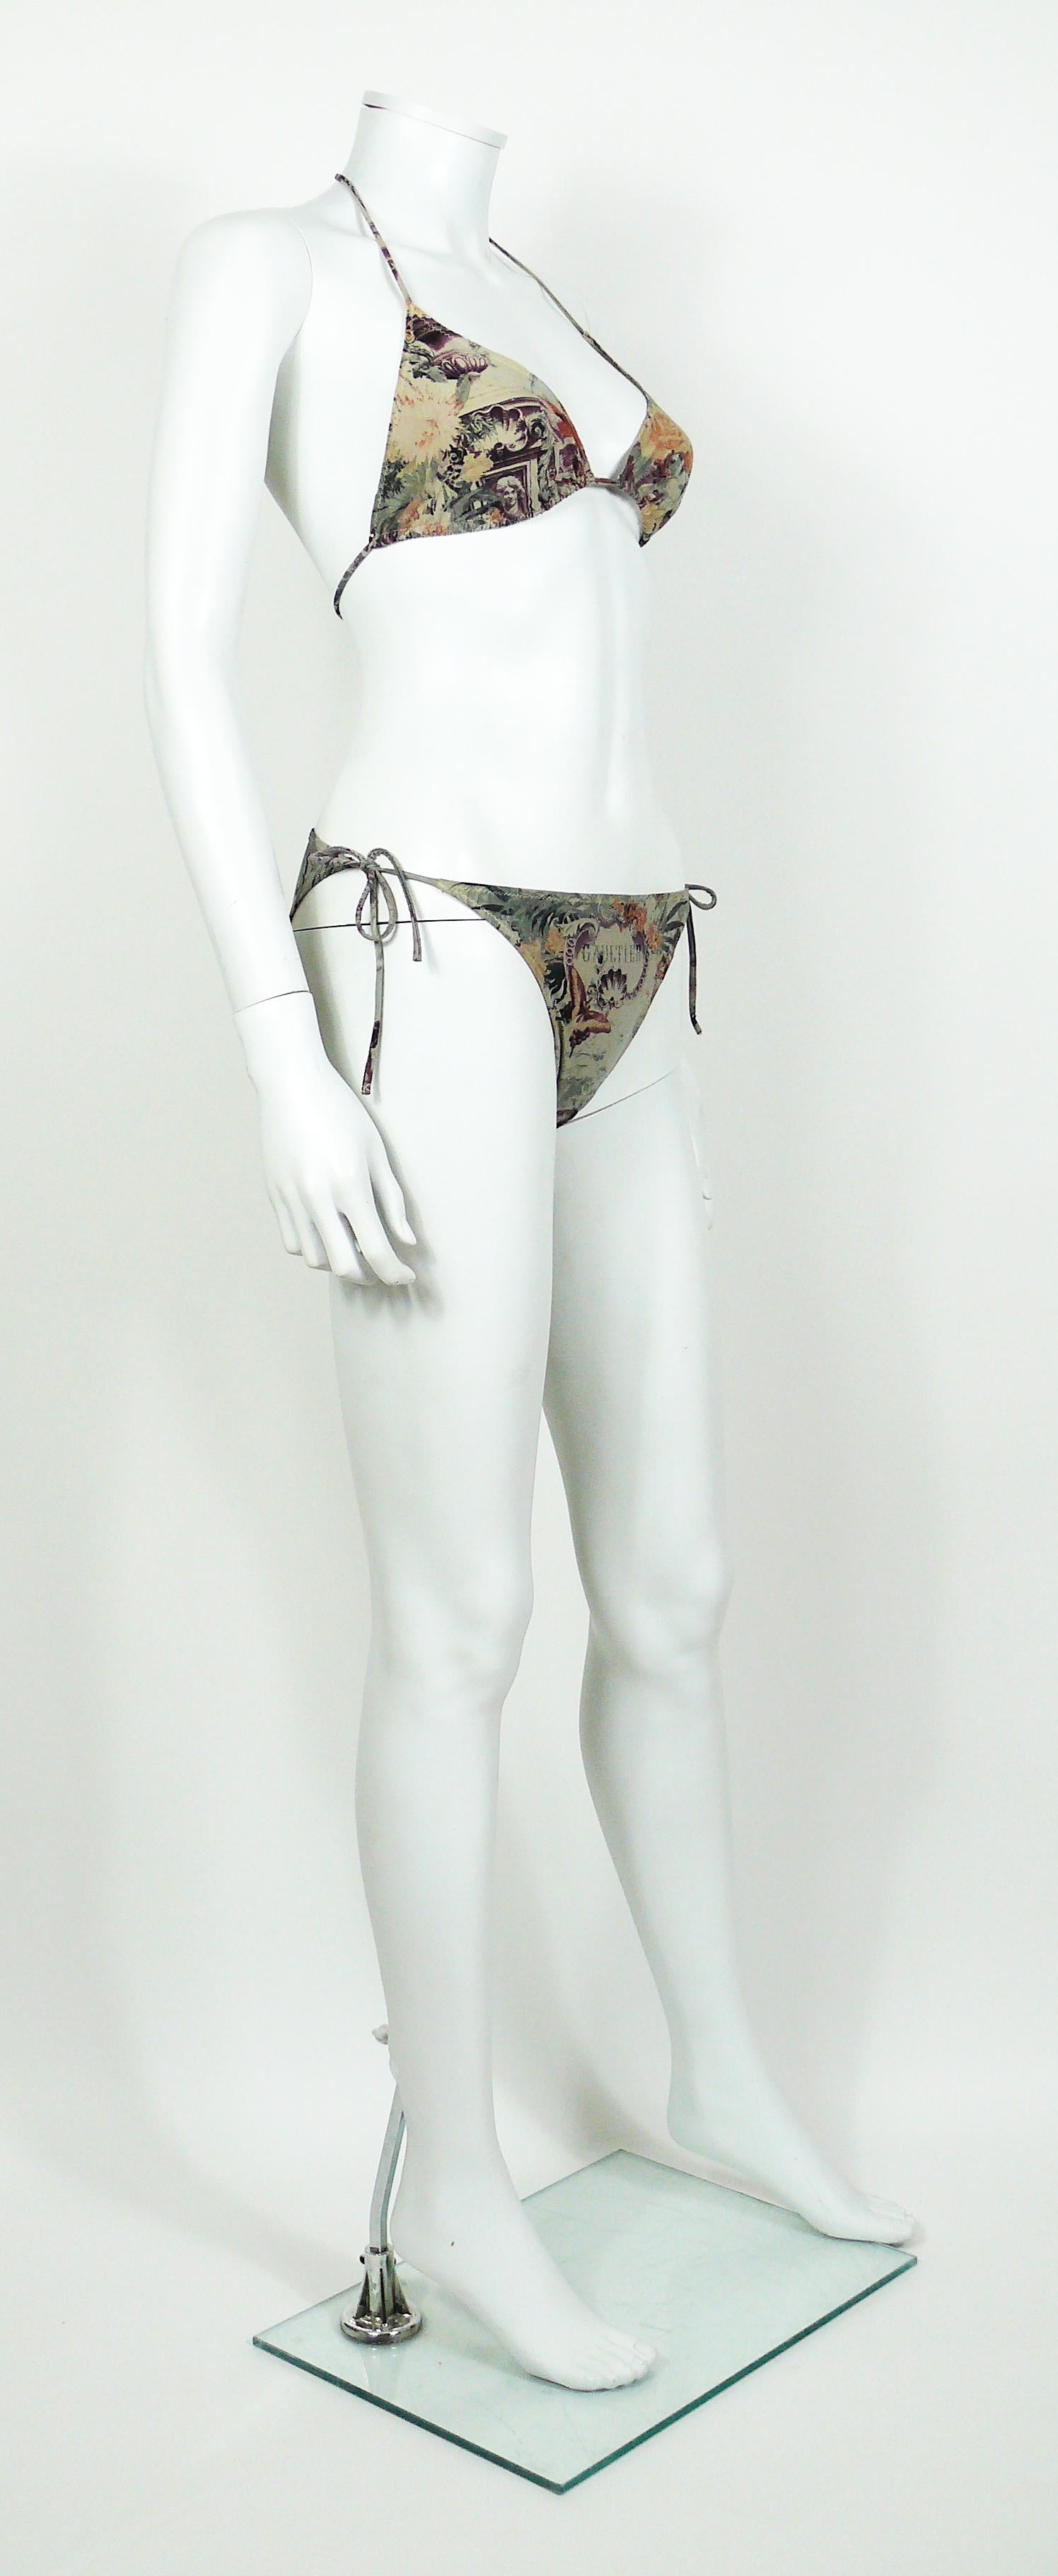 JEAN PAUL GAULTIER vintage tropical print two piece bikini swimsuit.

Label reads JEAN PAUL GAULTIER SOLEIL.
Made in Italy.

Size tag reads : 44.
Can adjust to smaller size (photographied on a S size mannequin).

Composition tag reads : 72% Polyamid